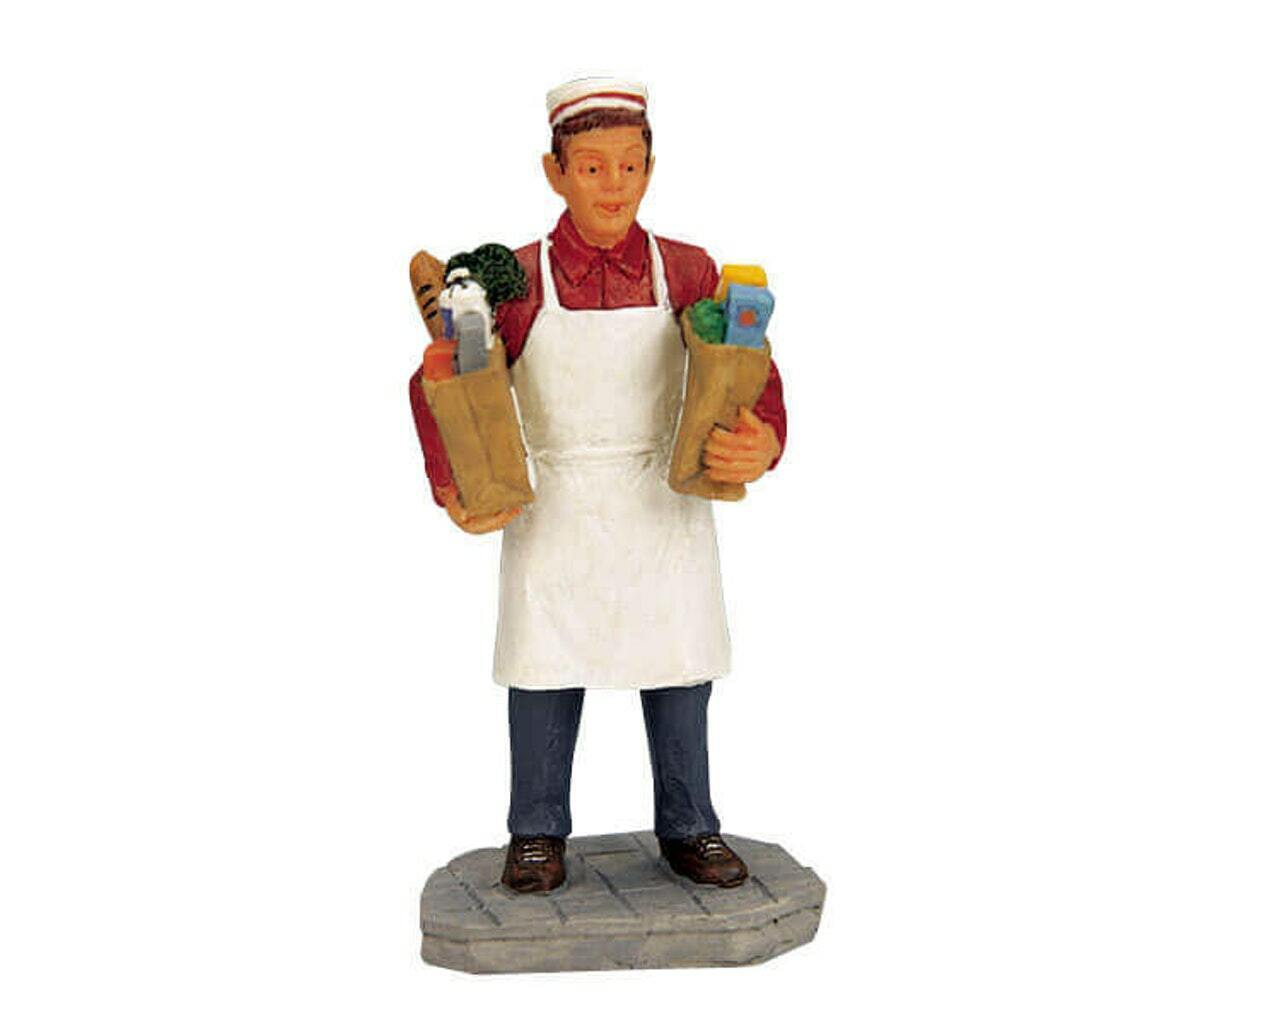 Lemax 2001 Grocery Boy Village Collection #12485-A Delivery Services Local Fresh